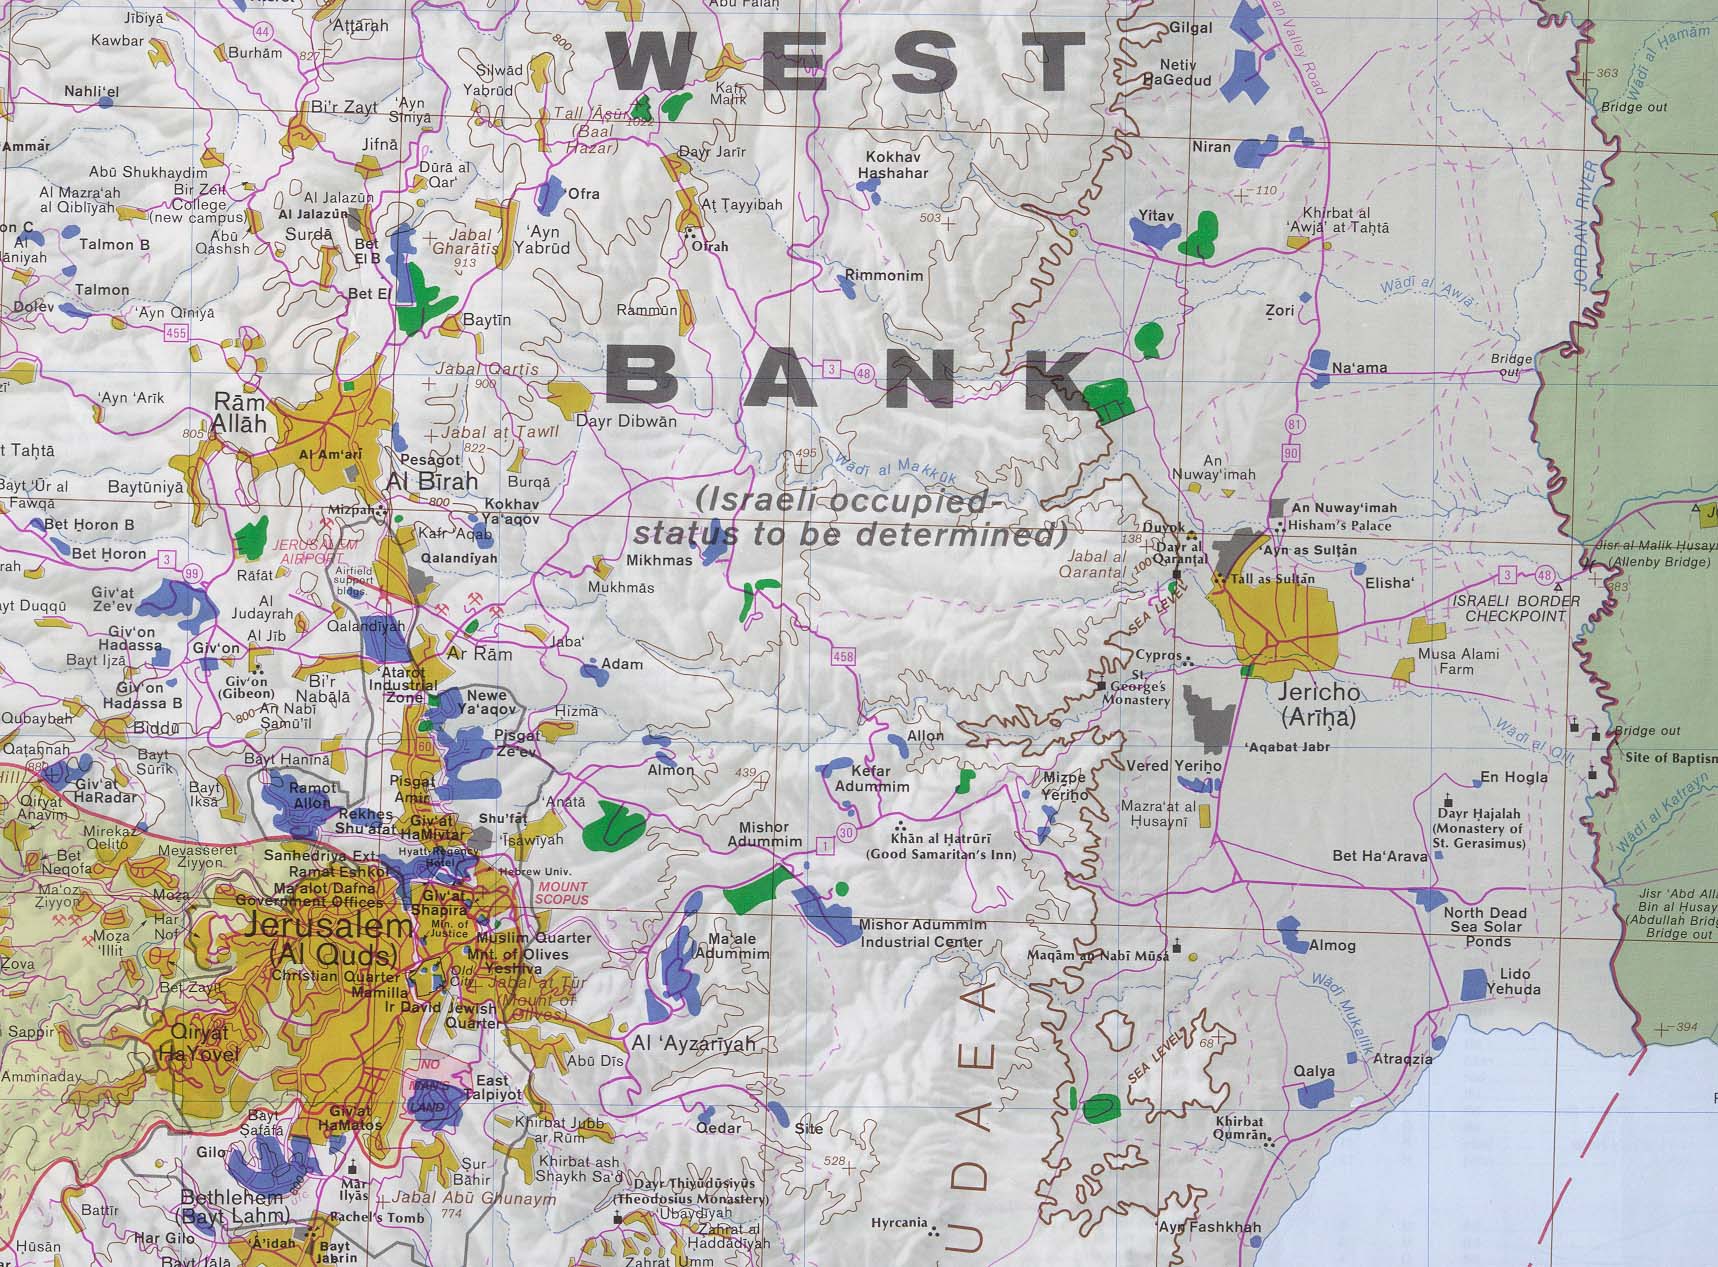 Map Of West Bank West Bank - Jerusalem and East (includes Jericho) (420K) 